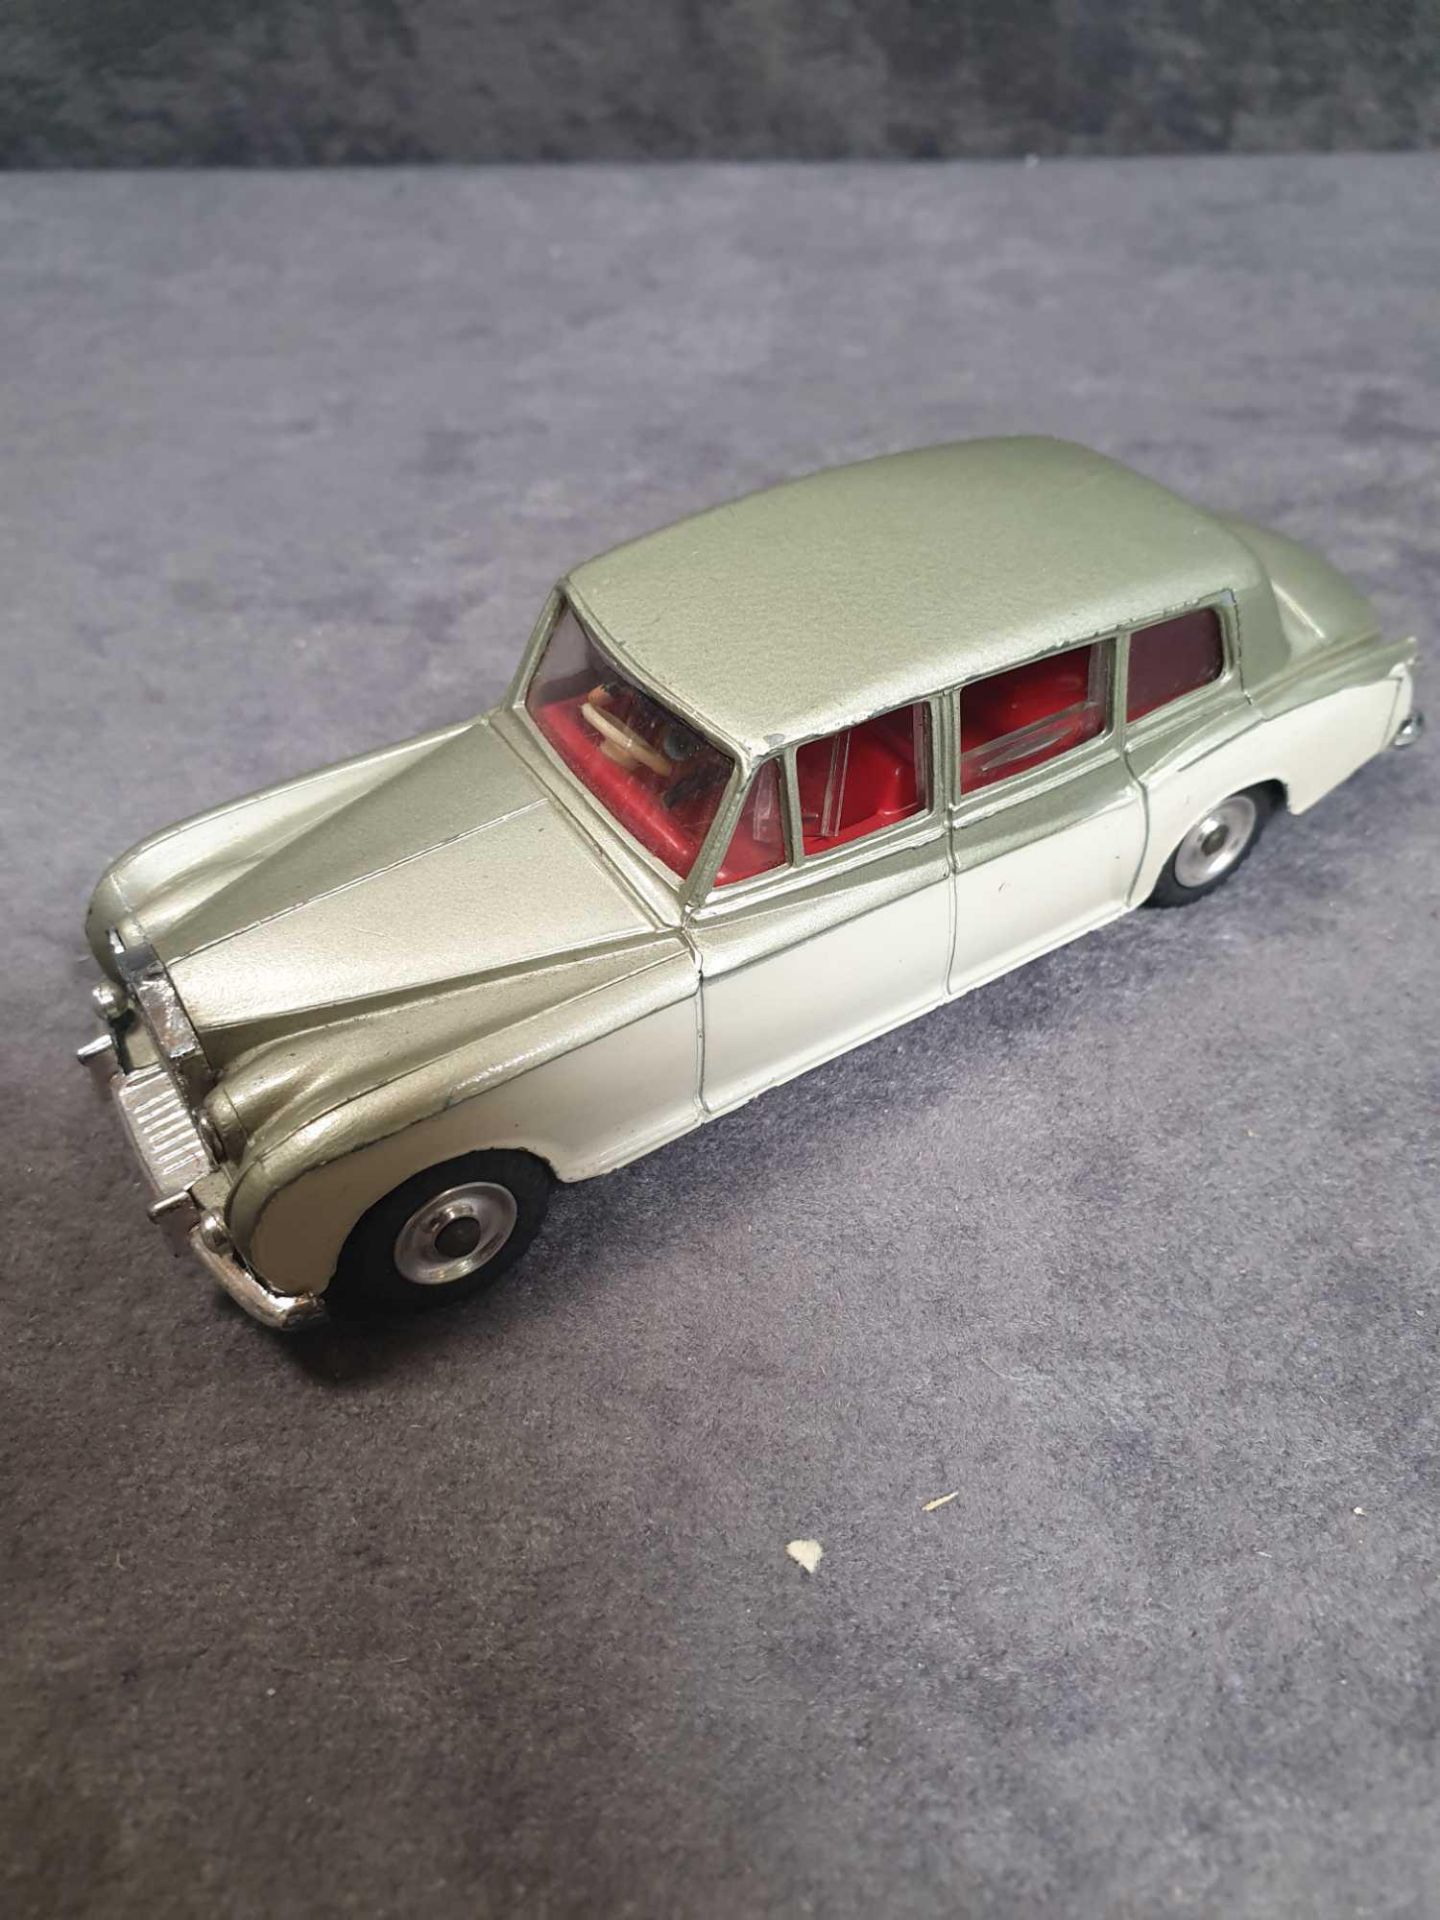 Dinky Diecast #198 Dinky Diecast Rolls Royce Phantom V Green/Cream - Concave Hubs Without Box 1962- - Image 2 of 4